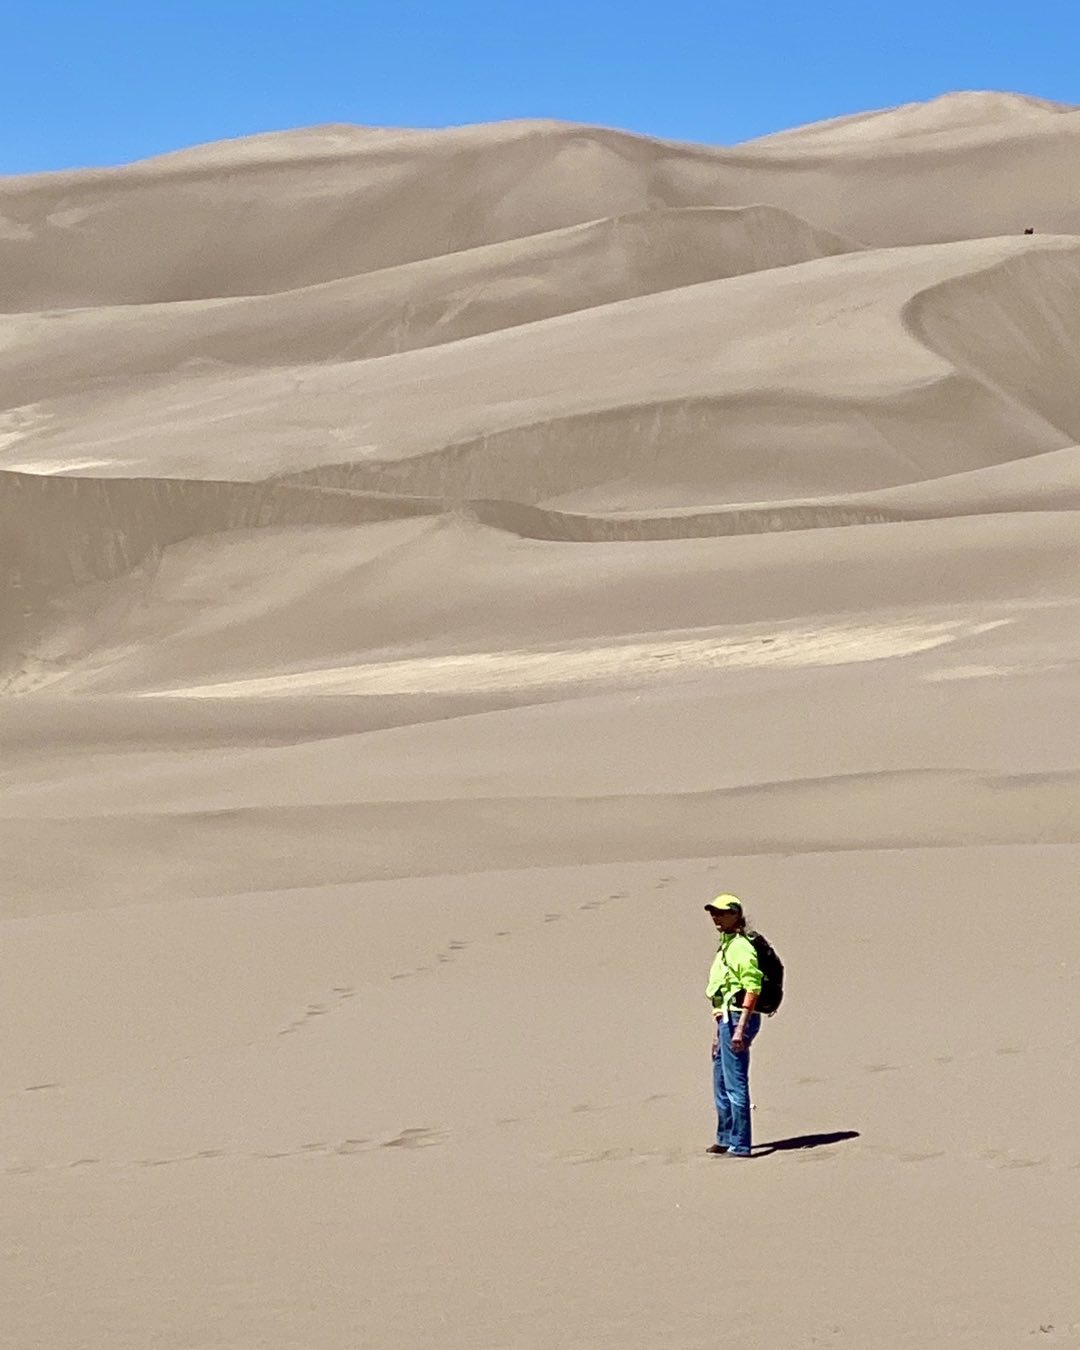 Cindy Orcutt preparing to climb the dunes at Sand Dune National Park in southern Colorado. Hiking there is fairly strenuous due to steep pitches and soft sand. Each step forward is accompanied with a half step sliding backward. #greatsanddunesnatuonalpark #orcuttphotography.com #hikingthedunes #revelvantookusthere